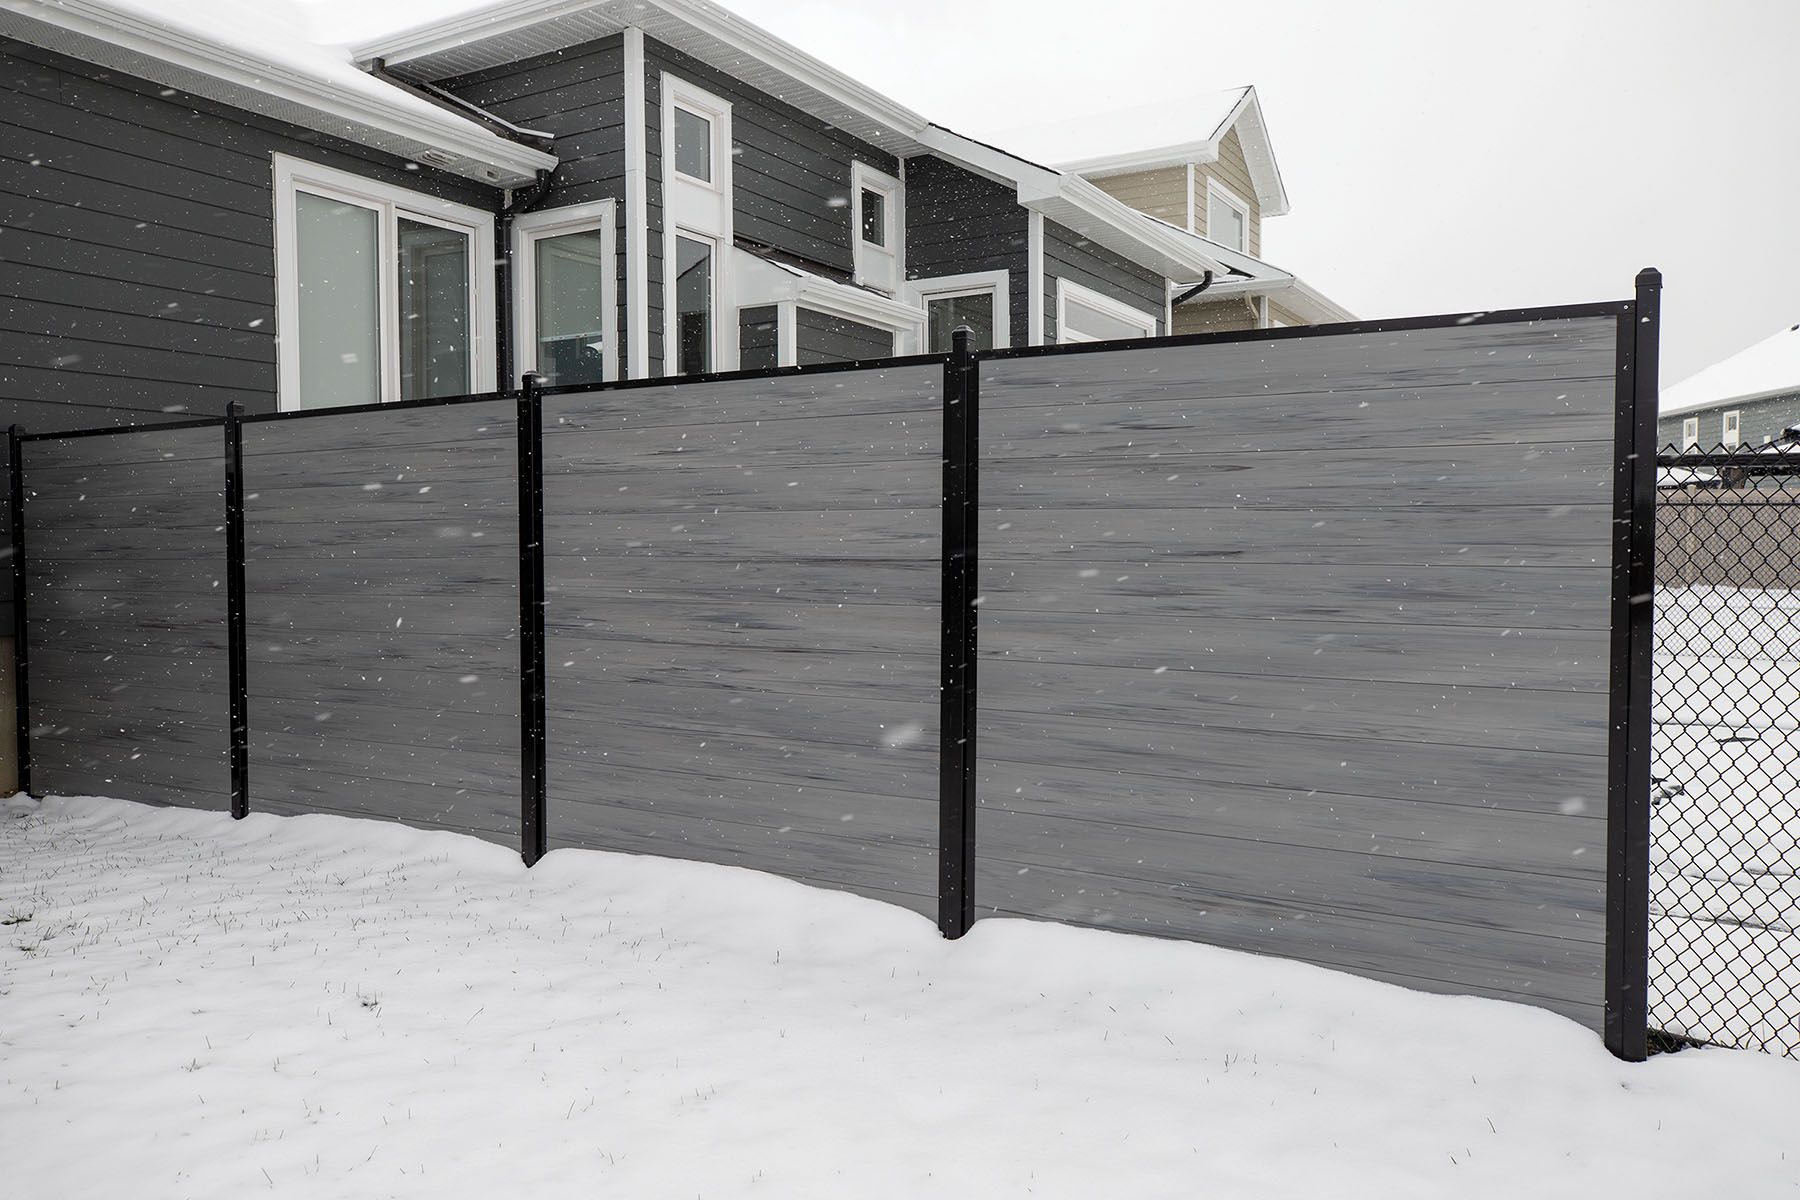 Does my neighbour have to pay for half of my fence? Ottawa Citizen